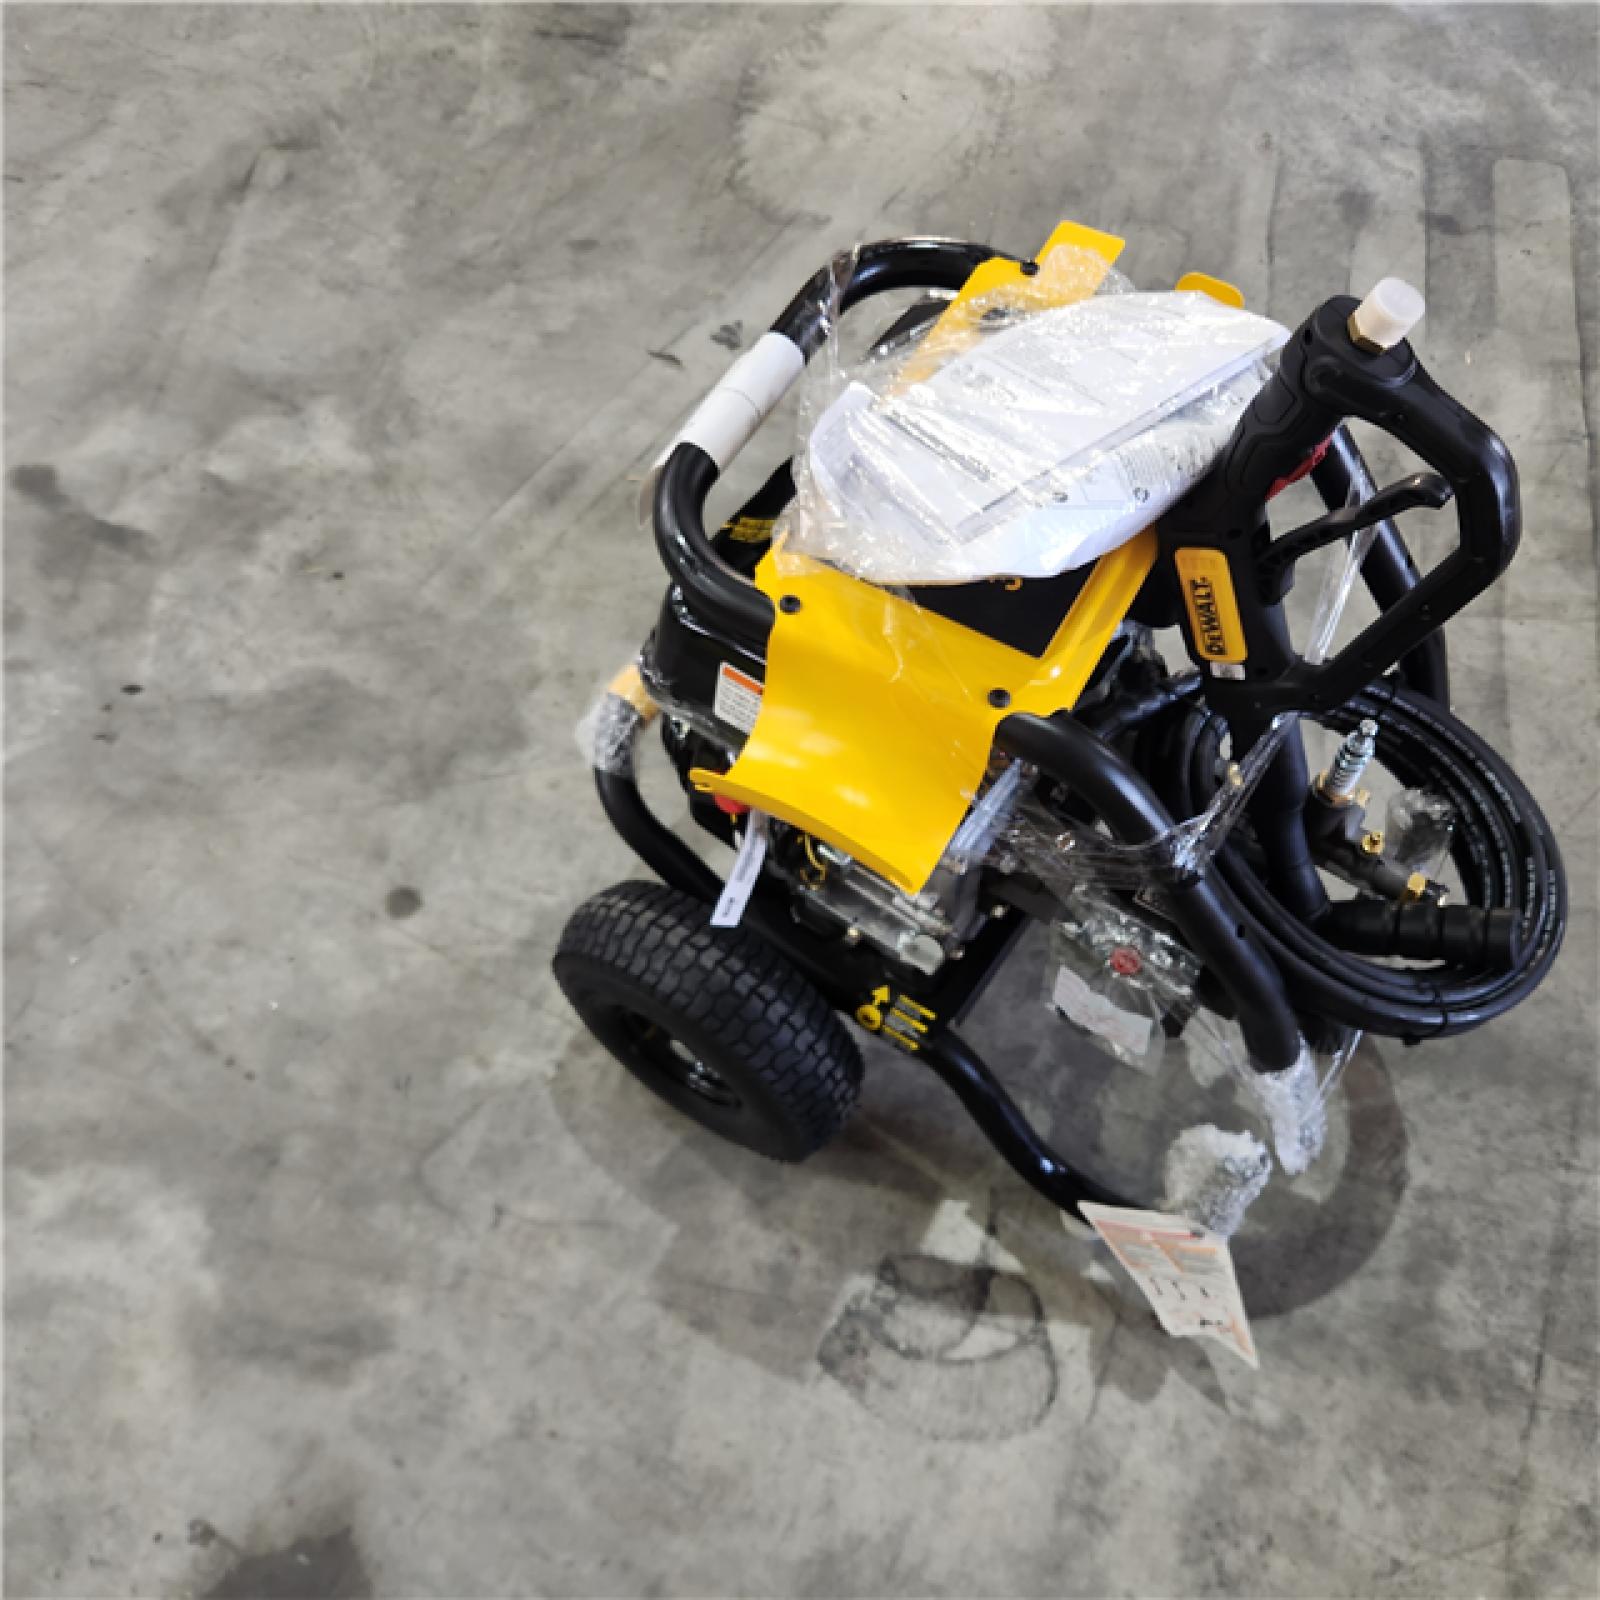 HOUSTON Location-AS-IS-DEWALT 3600 PSI 2.5 GPM Gas Cold Water Professional Pressure Washer with HONDA GX200 Engine APPEARS IN NEW Condition